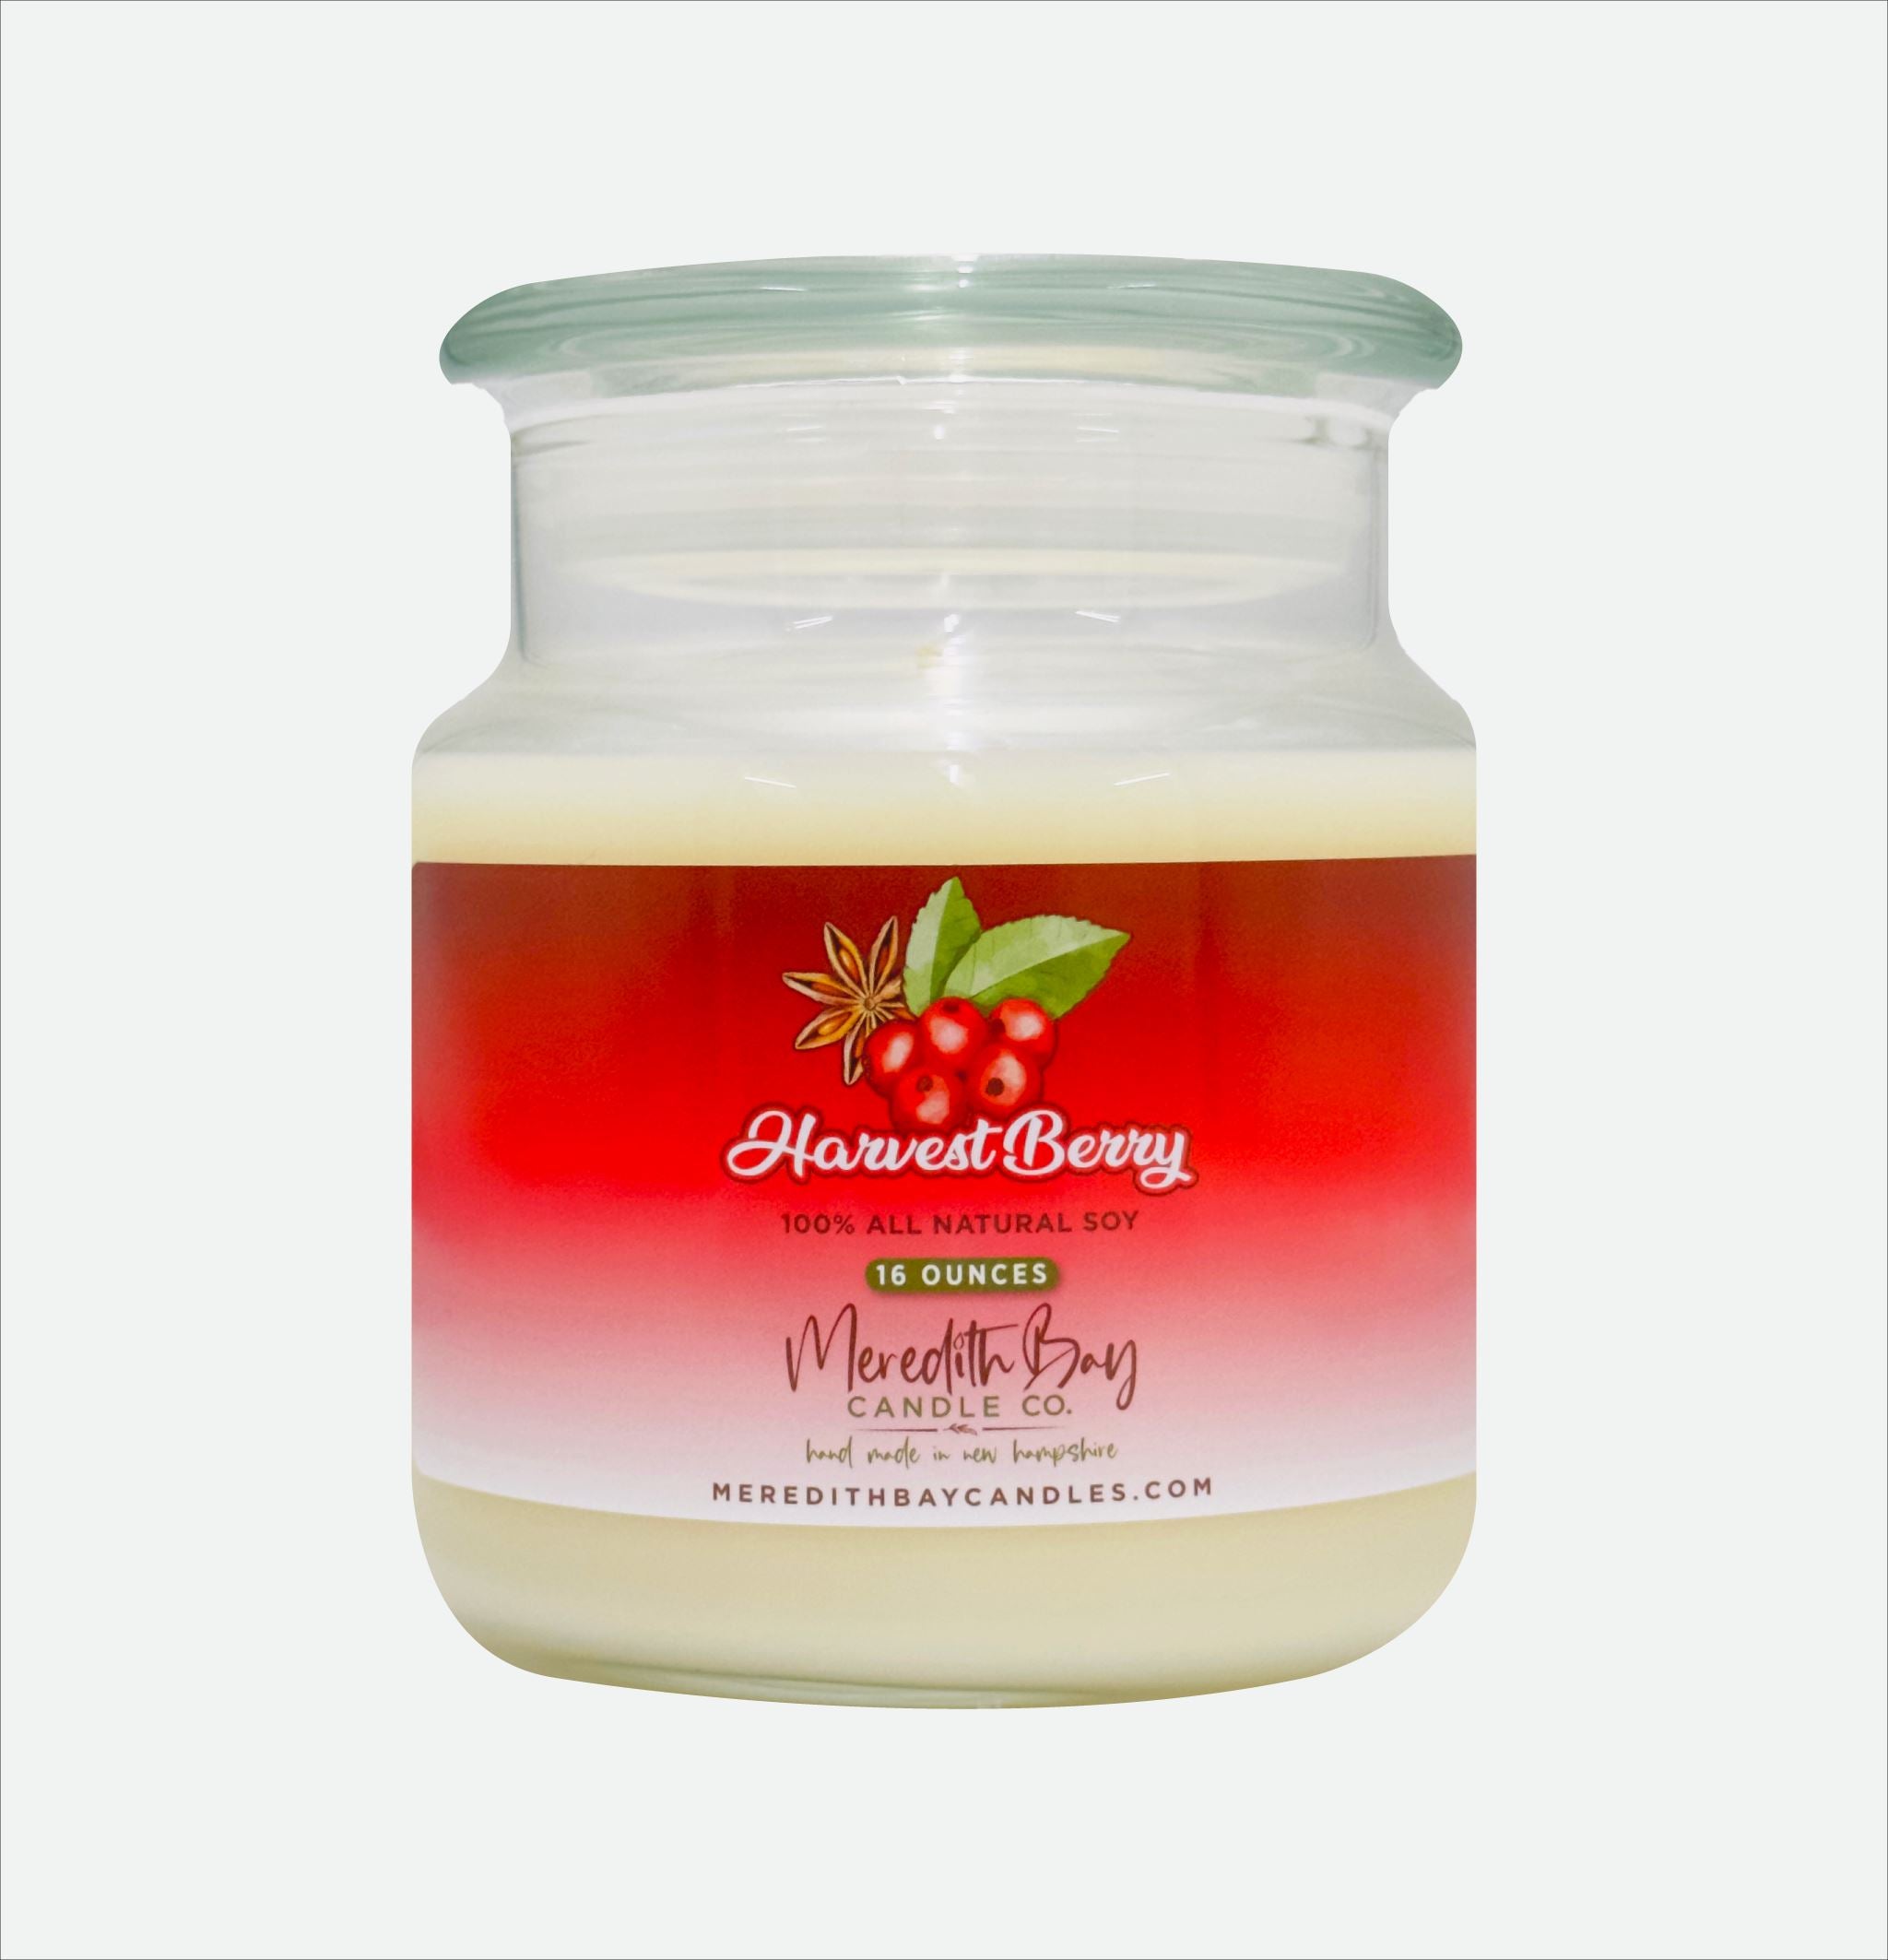 Harvest Berry Soy Candle Meredith Bay Candle Co 16 Oz 